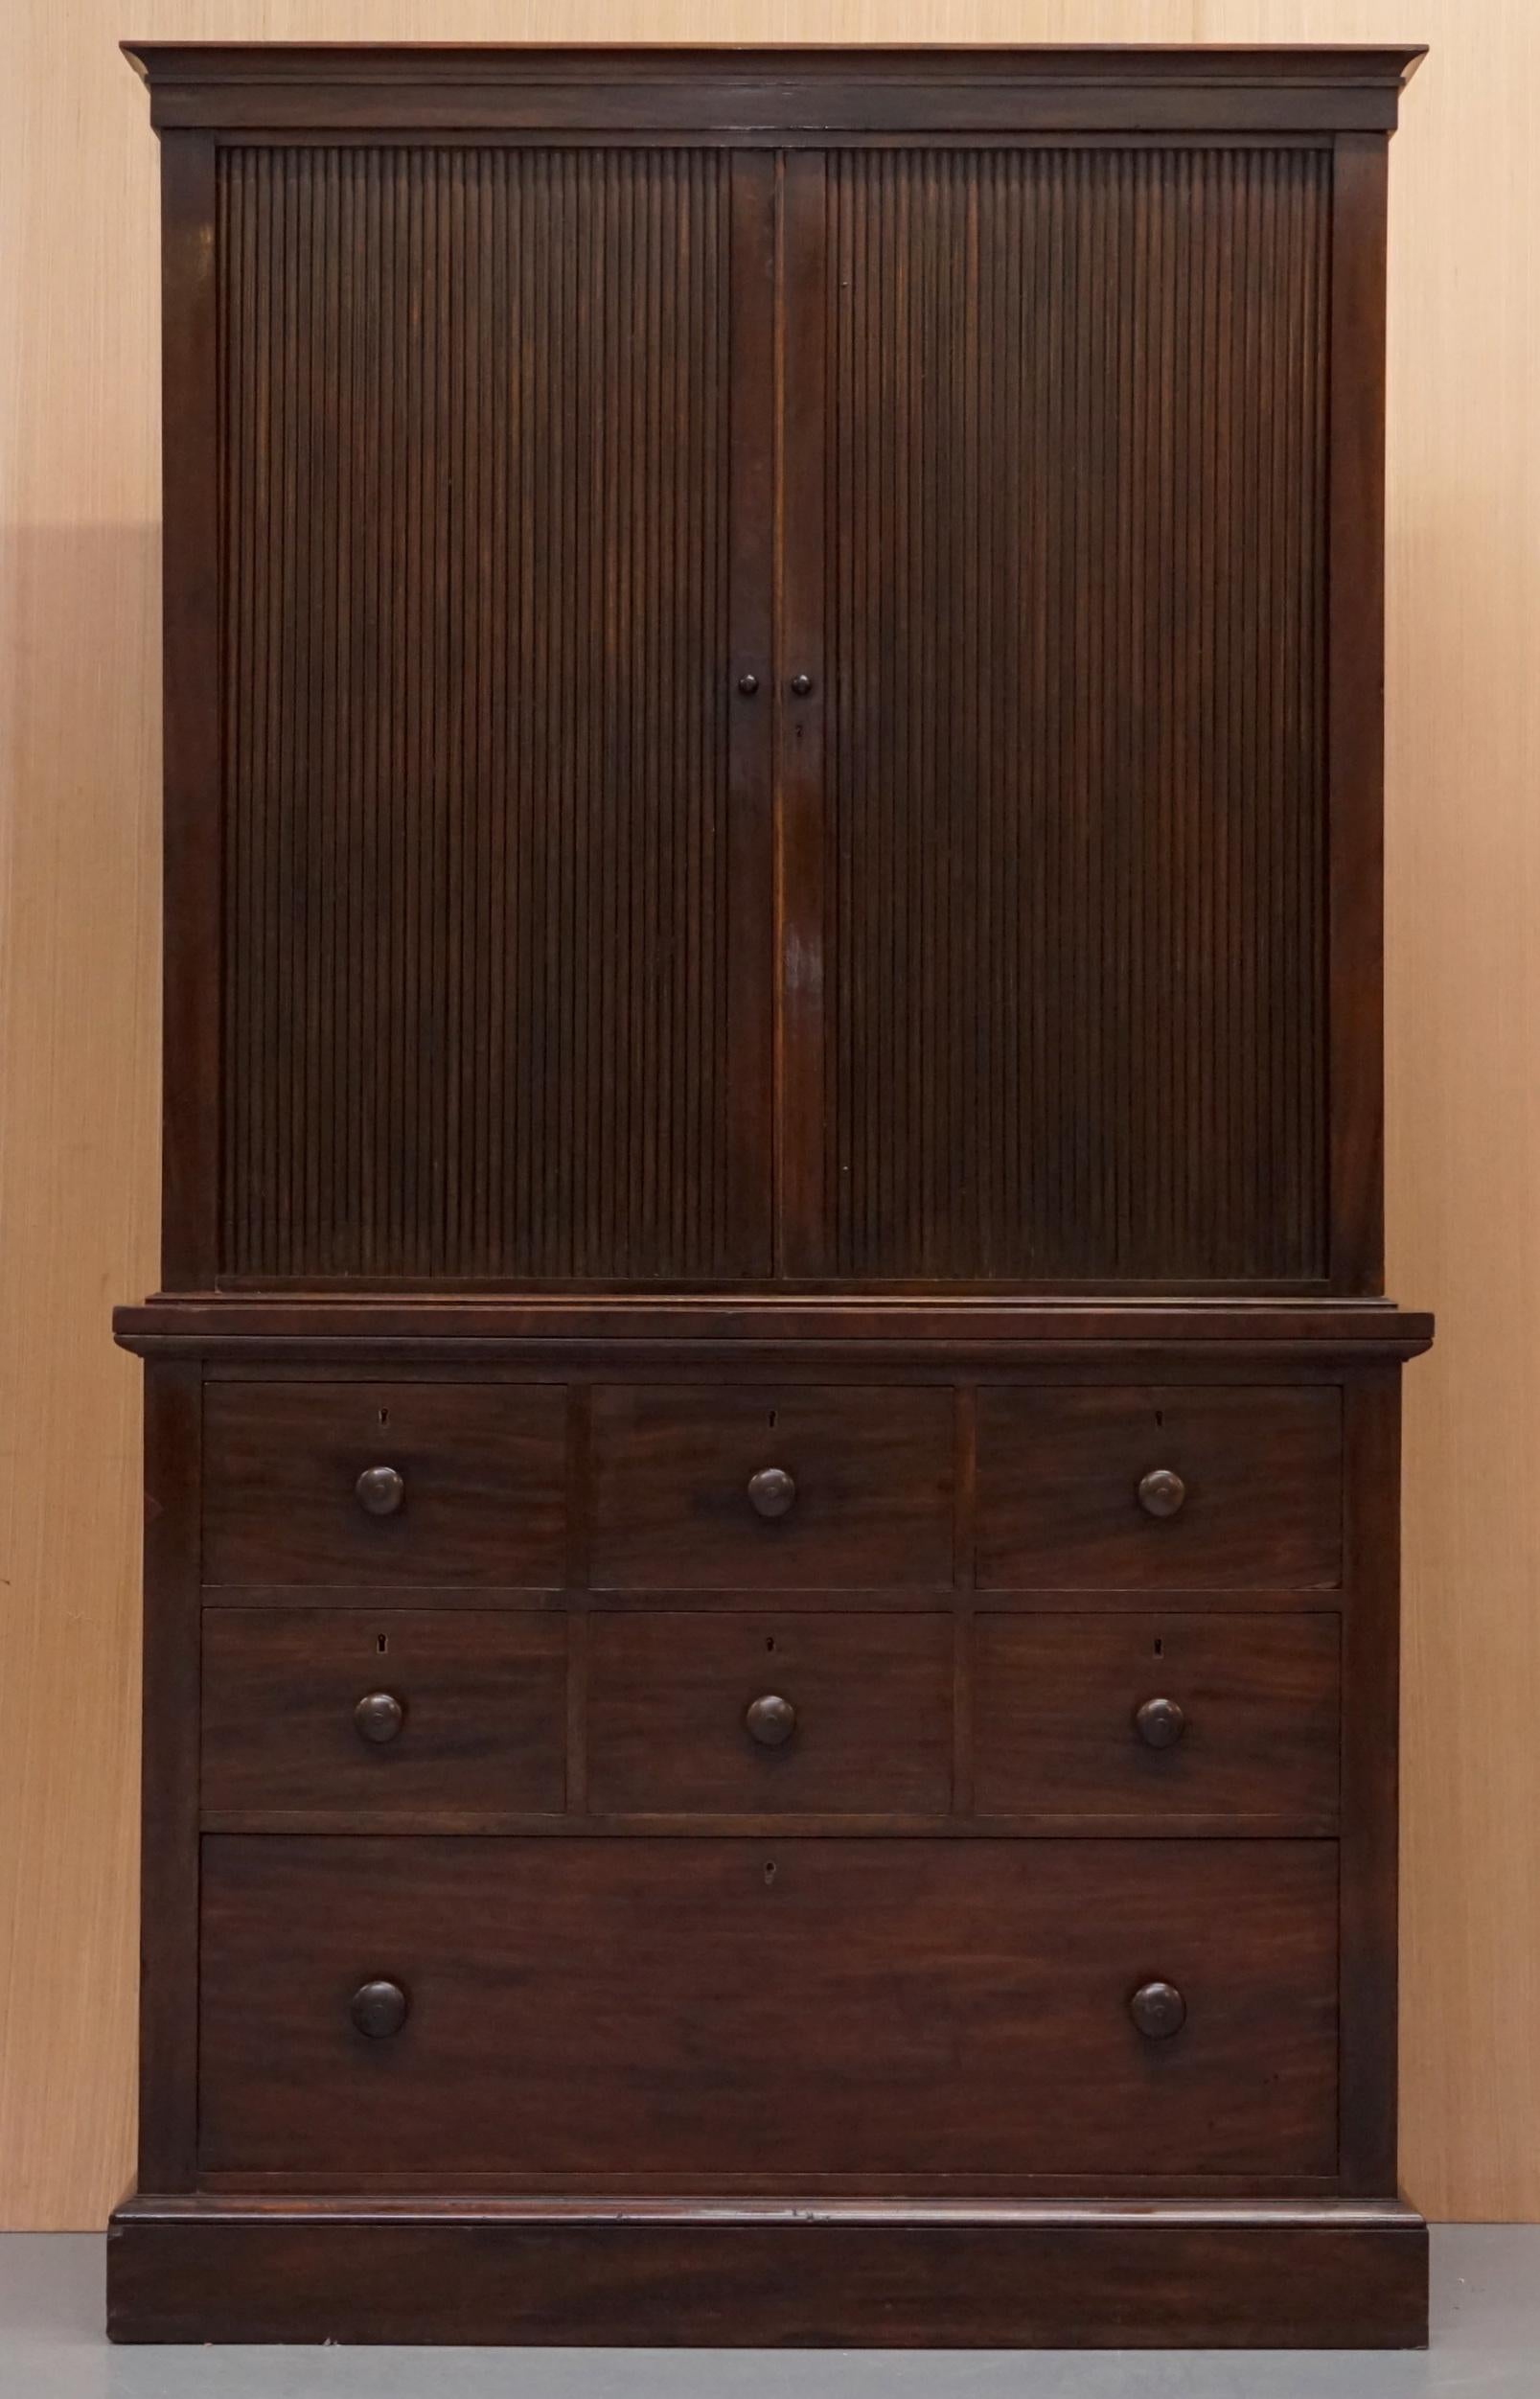 We are delighted to offer for sale this very rare Victorian tambour door cupboard and bank of drawers

I have never seen another cupboard like this, tambour drawers are almost always mounted vertically, it is very rare to see them horizontally.